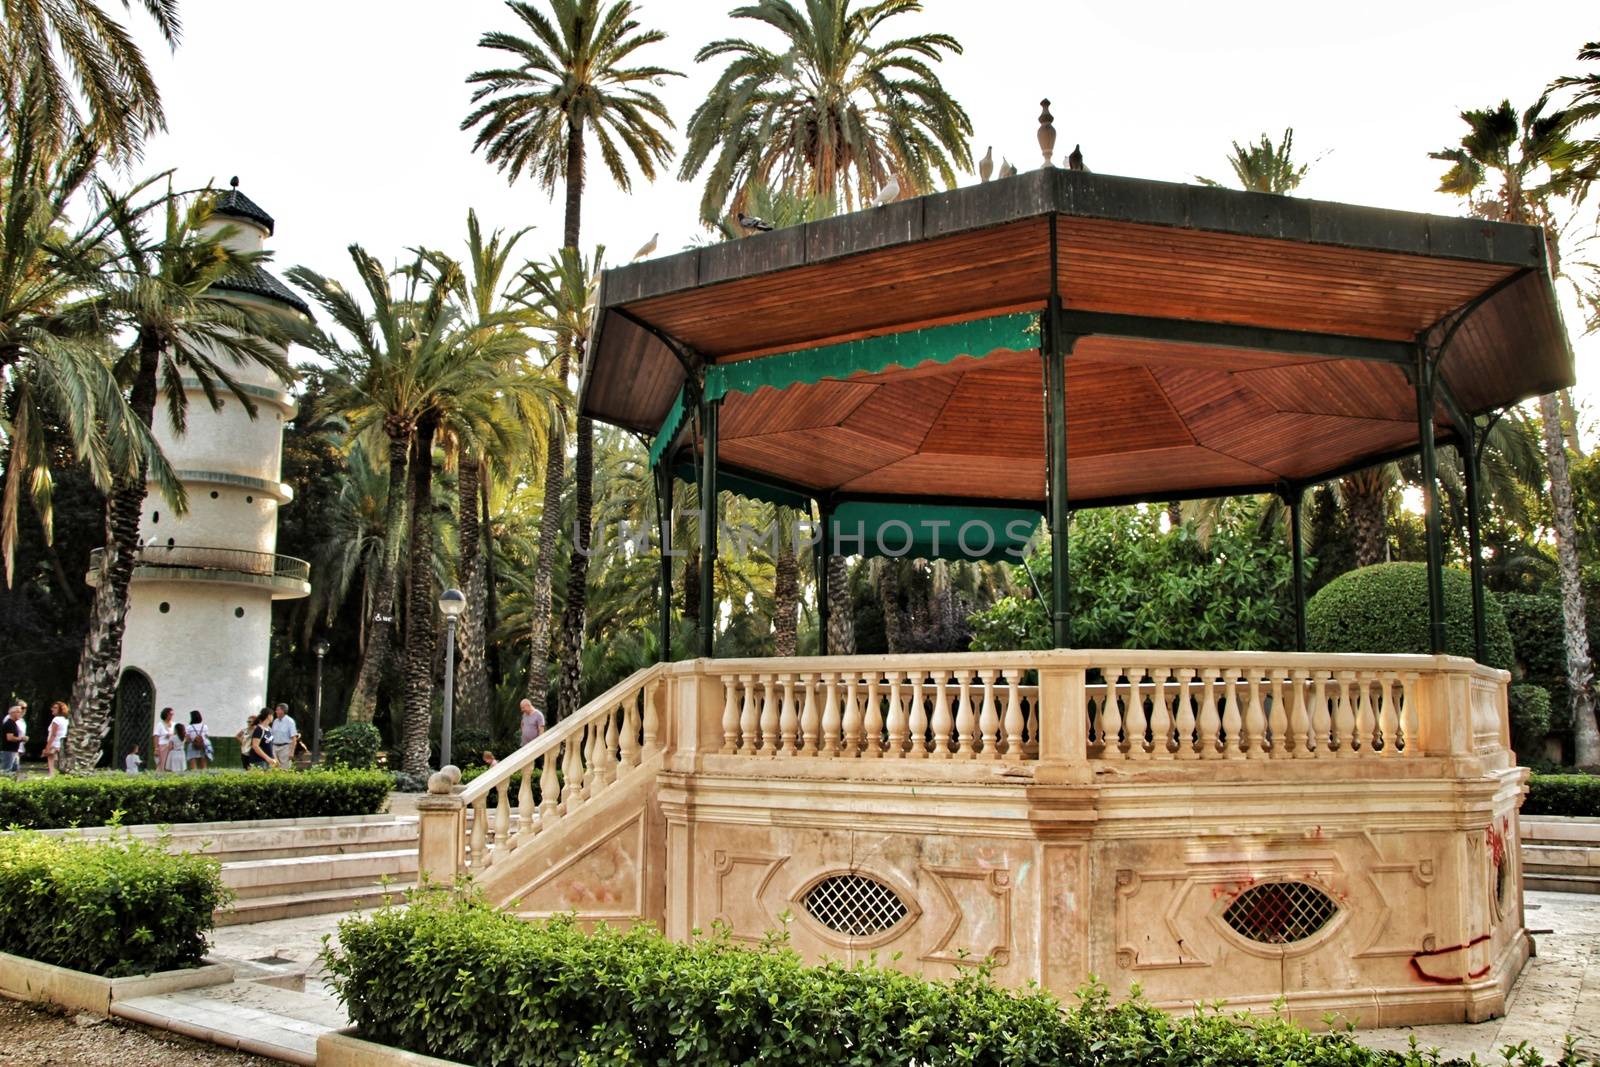 Music kiosk in the municipal park of Elche between palm trees by soniabonet